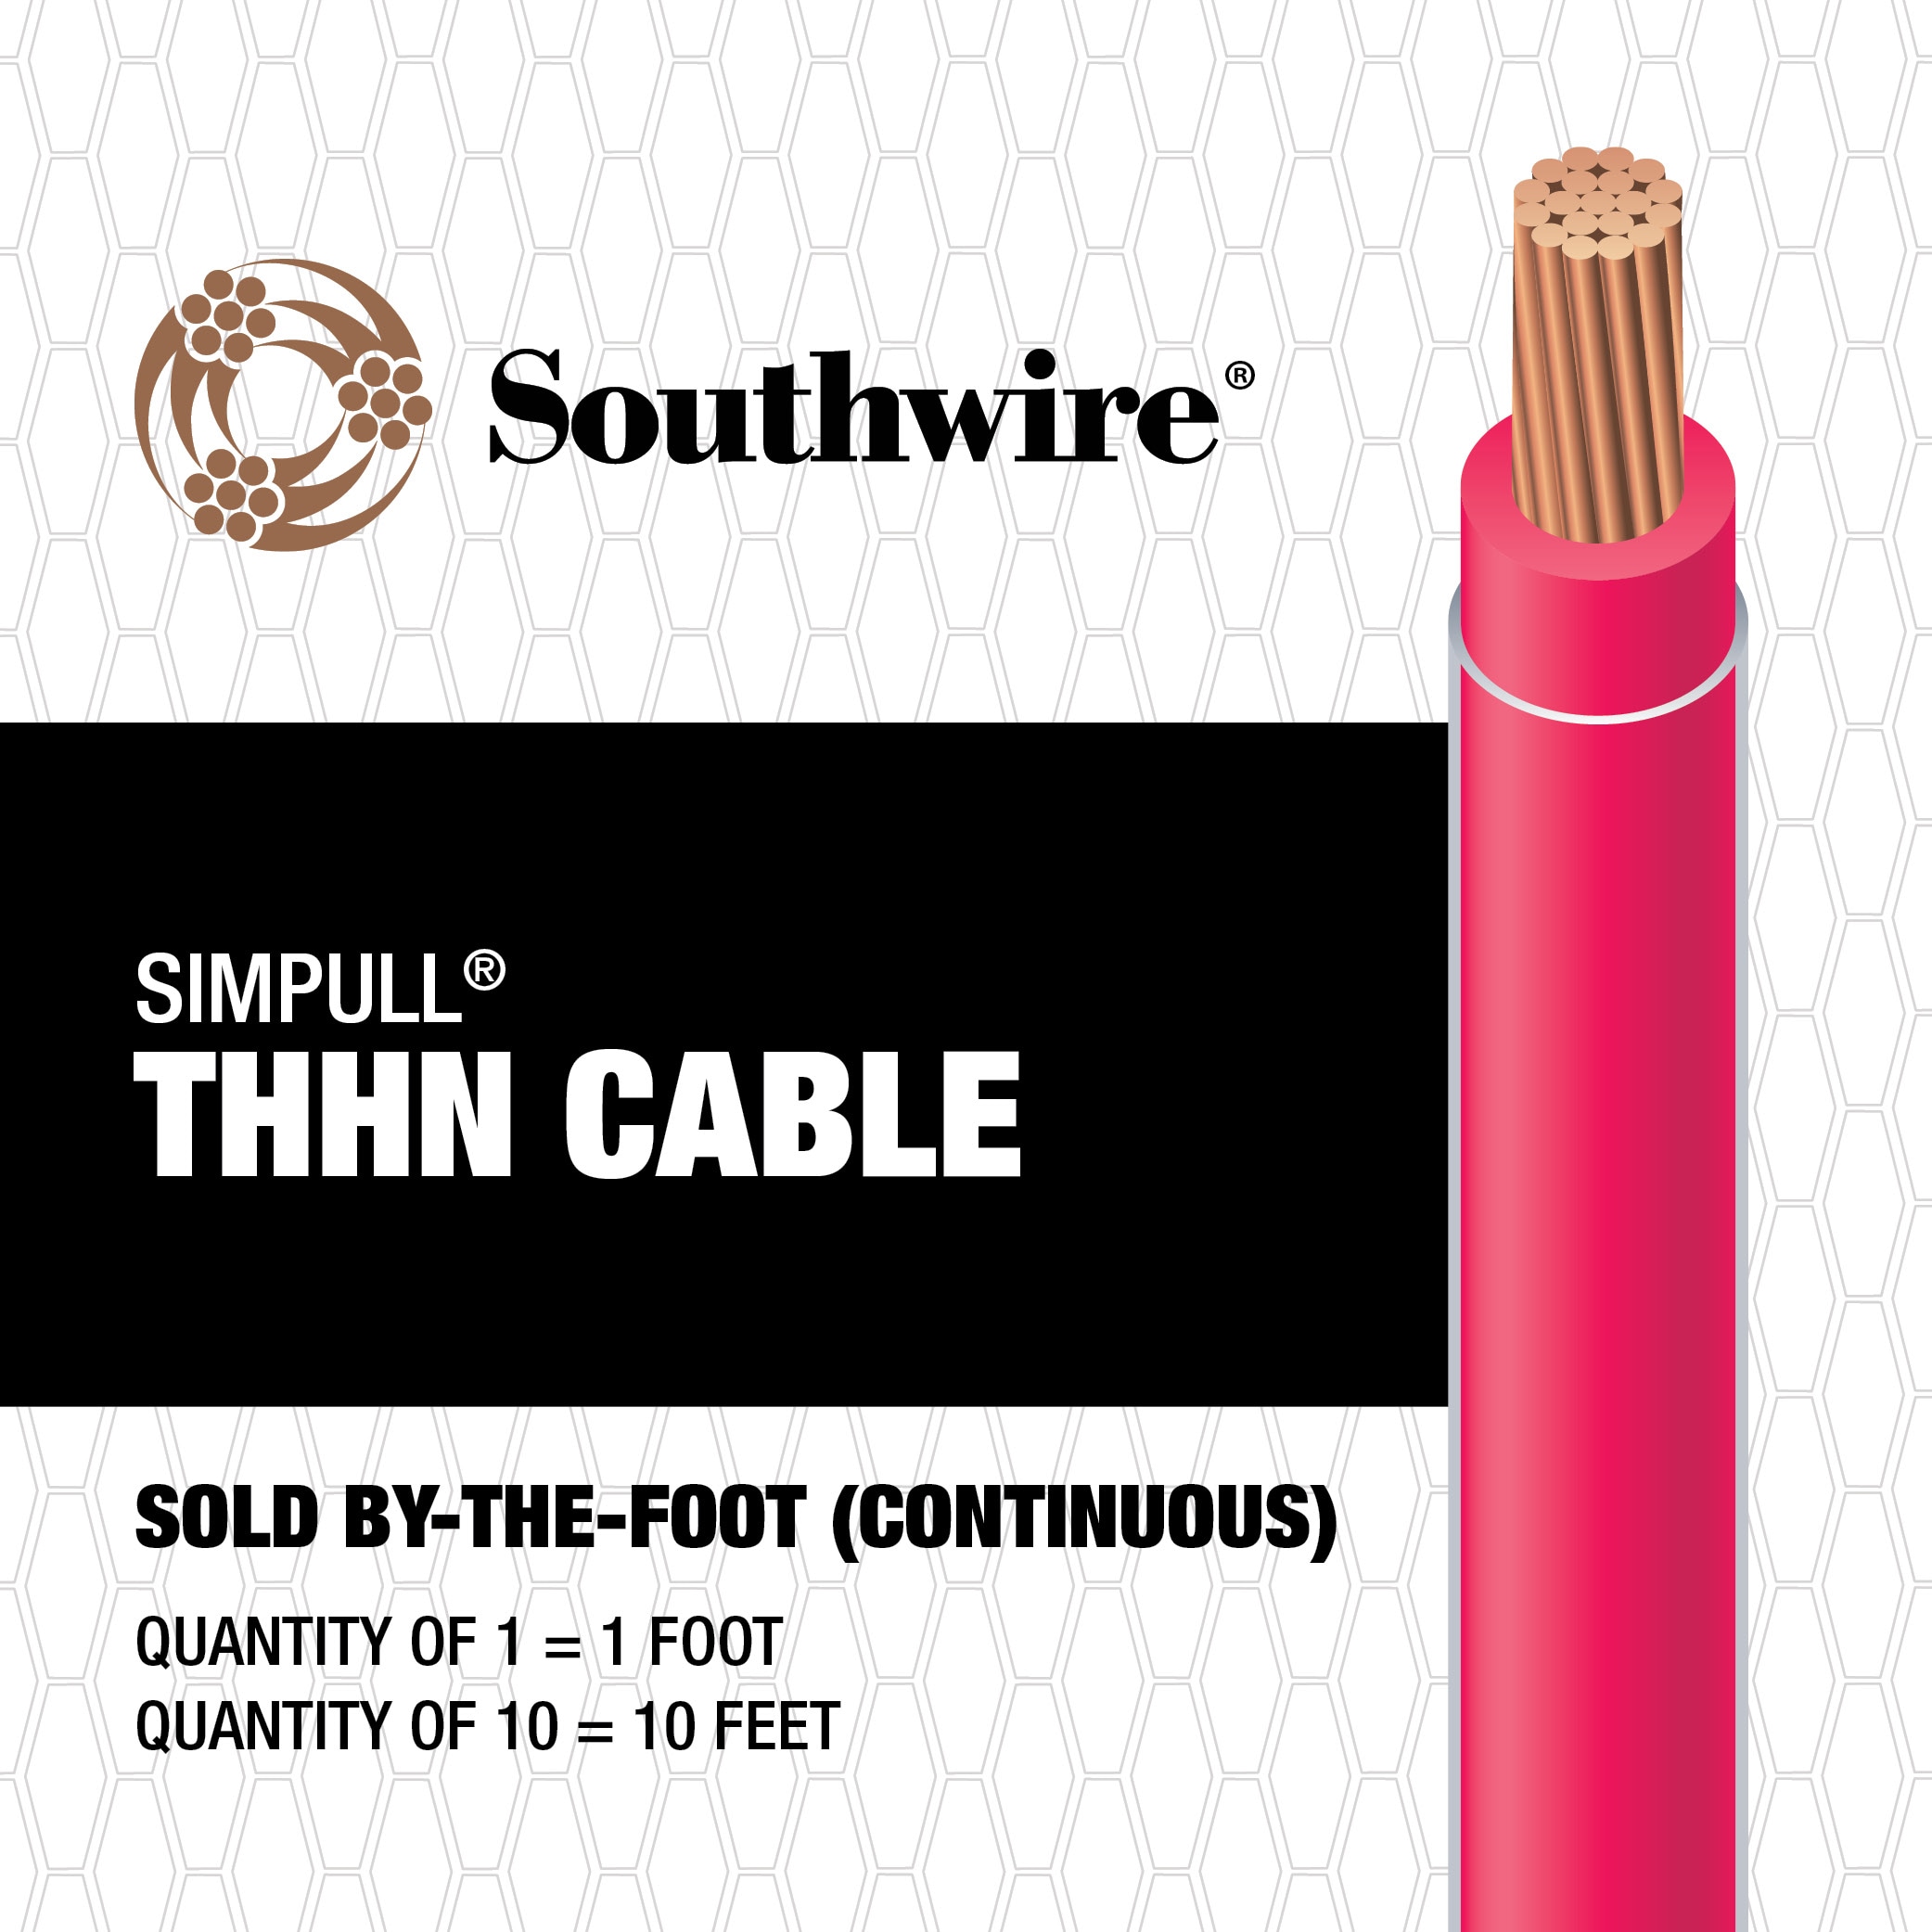 6 AWG wire: One wire size fits many applications